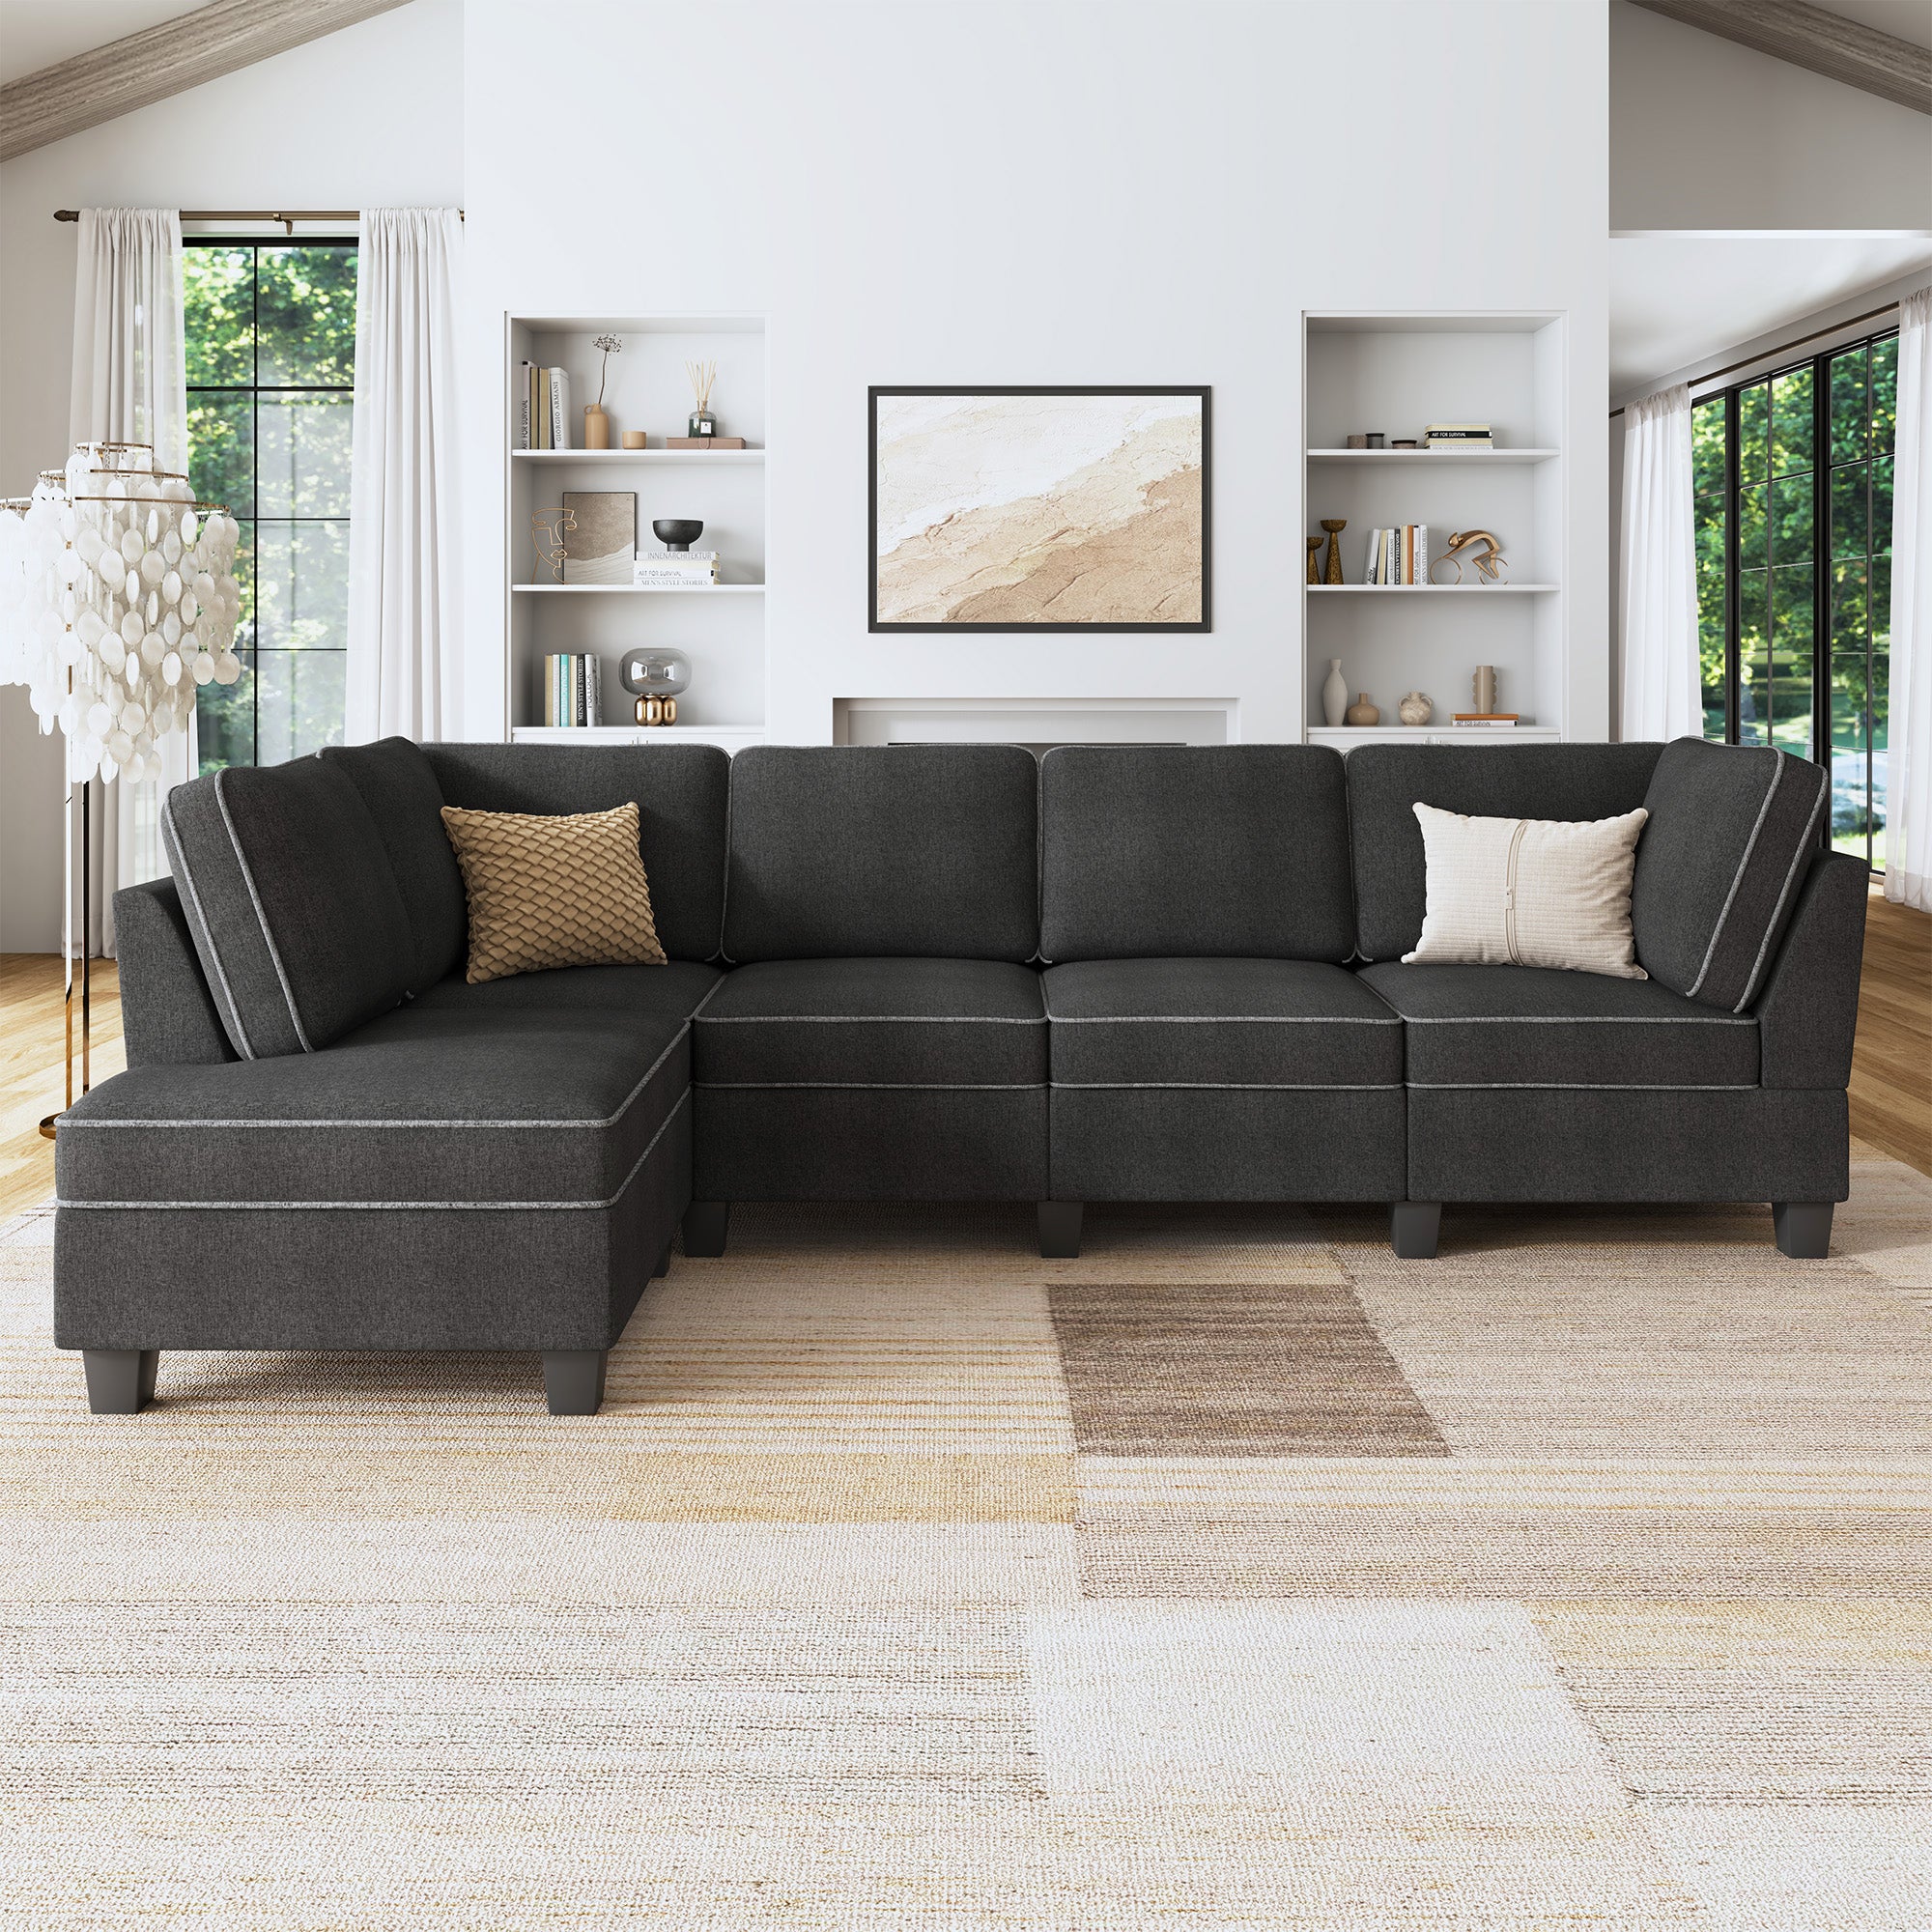 HONBAY 4-Seat L-Shaped Sectional Corner Sofa with Reversible Chaise